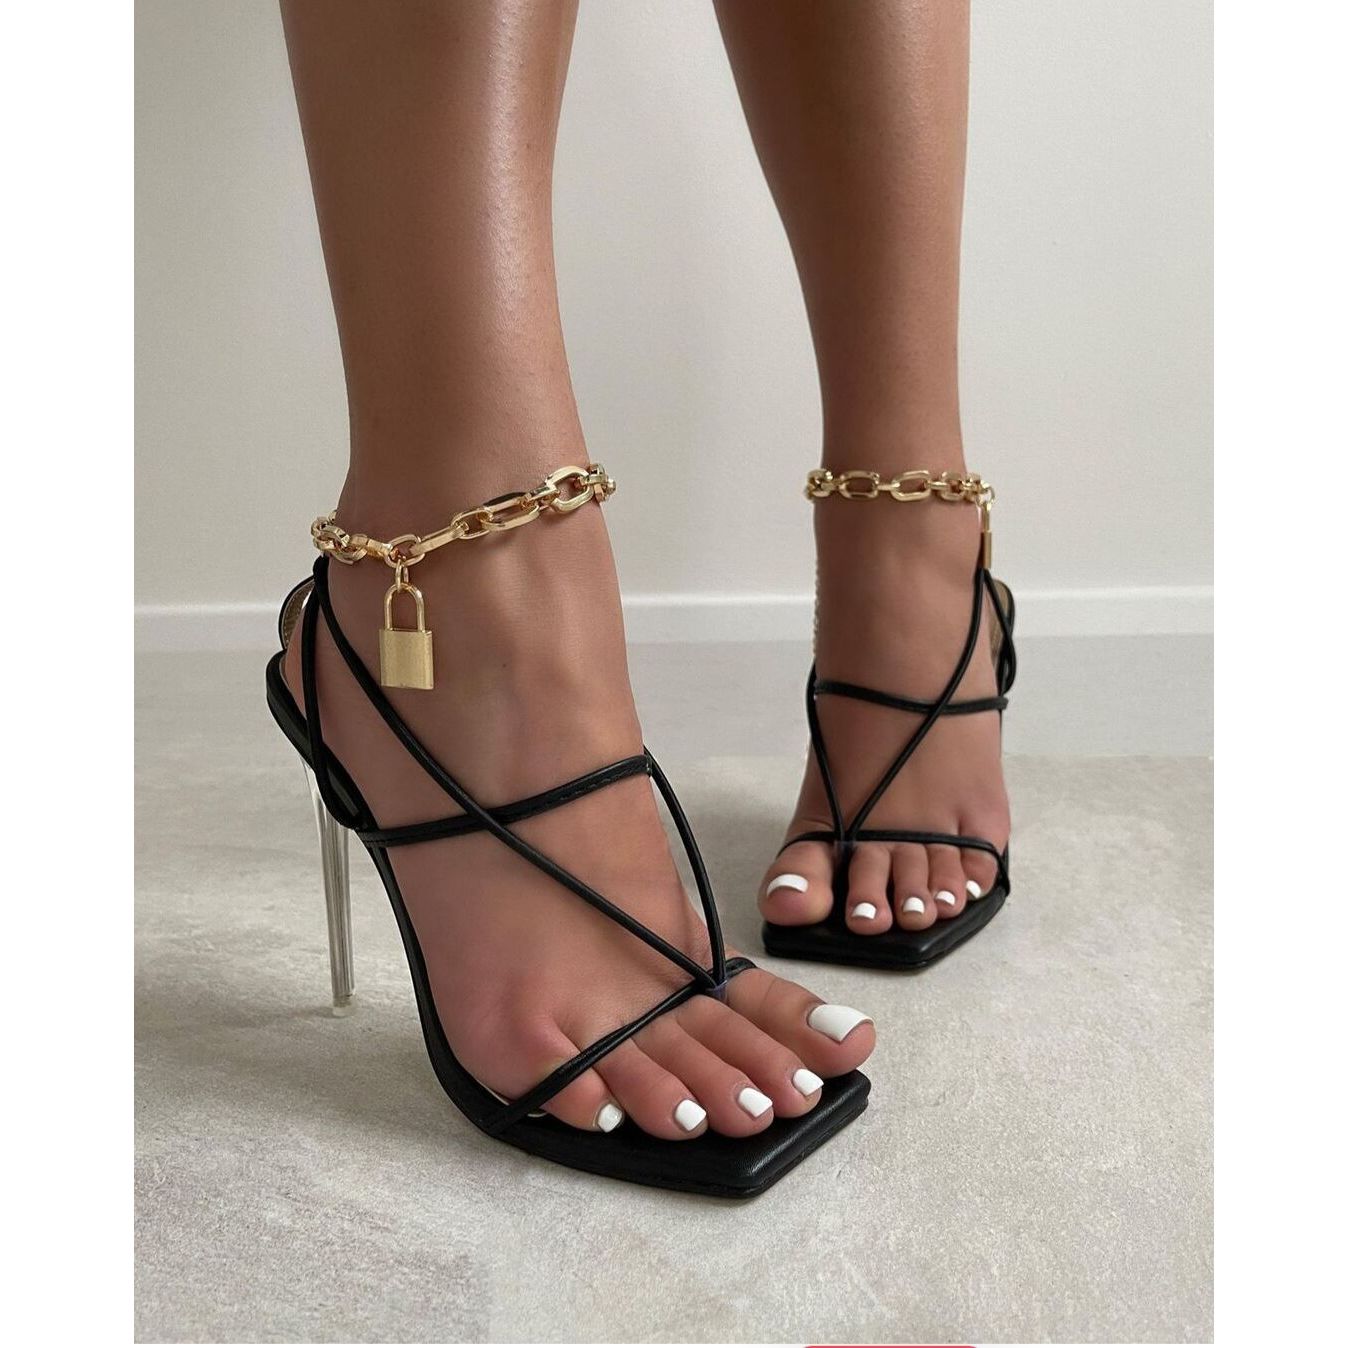 Buy Online Premimum Quality, Trendy and Highly Comfortable Lock Chain Style Sandals Square Toe Stiletto High Heel Shoes Party - FEYONAS